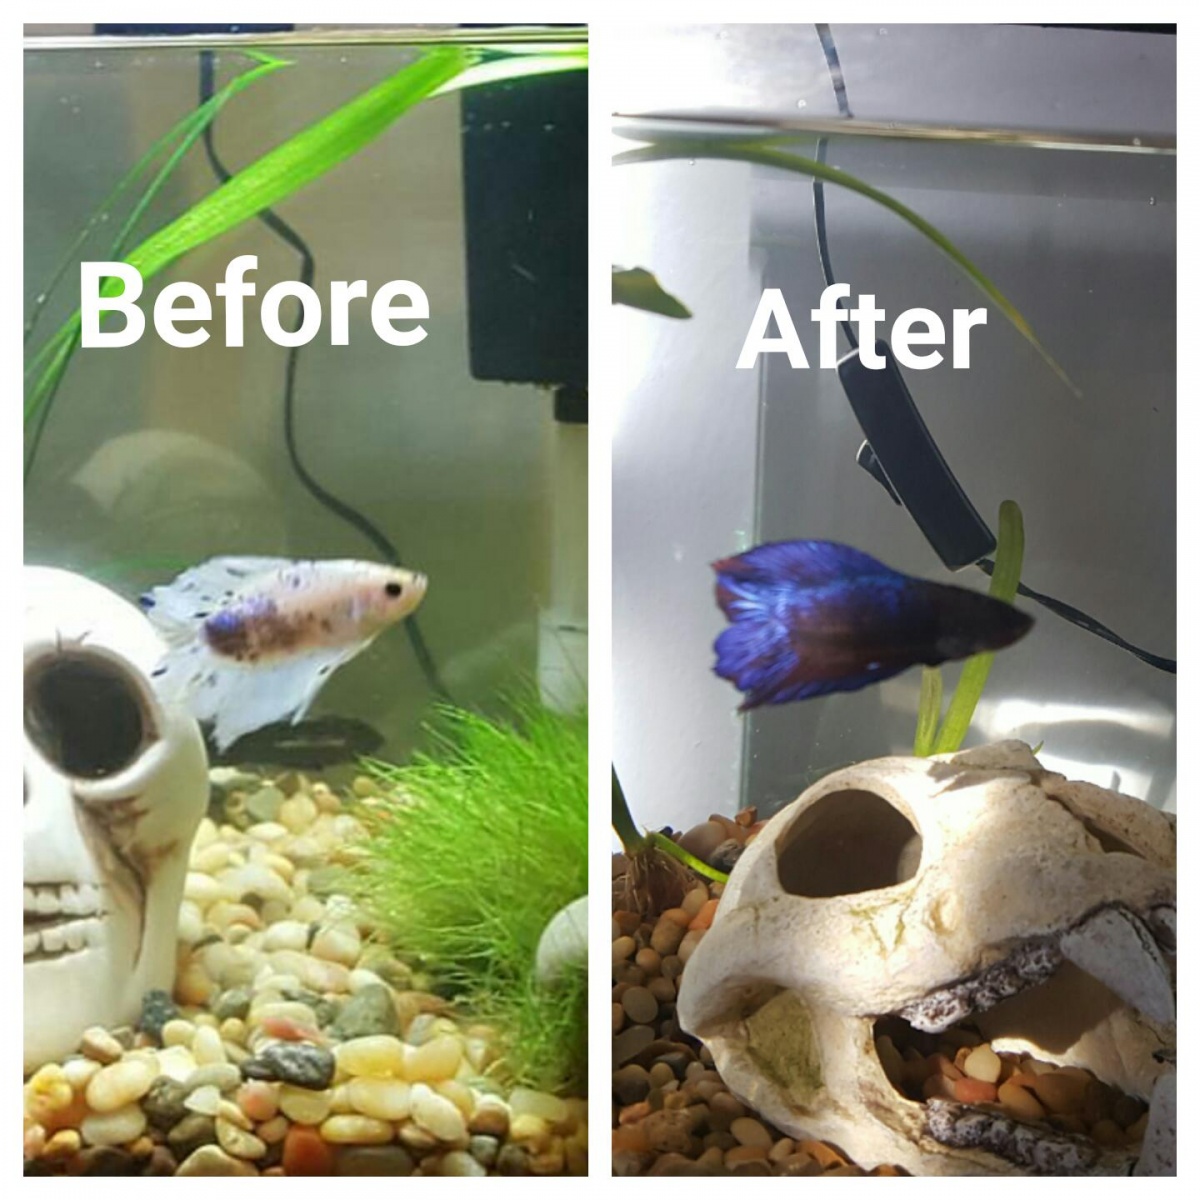 Before and after of when I fist got my betta and after 3 months of proper care!